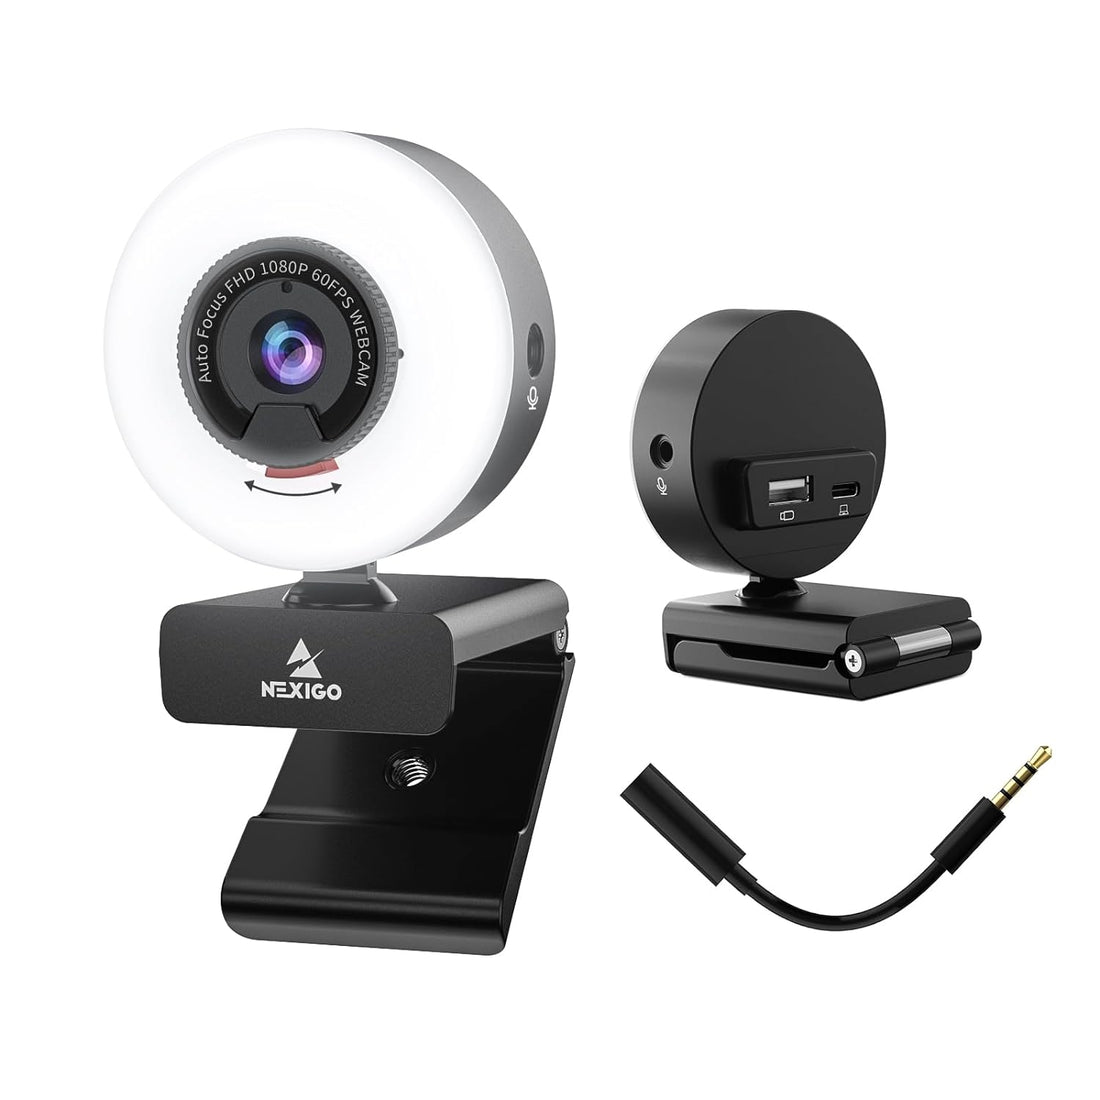 NexiGo N960E Pro 60FPS Webcam with Mic/Headset Jack and Extra USB Port, 1080P Web Camera with Light, Fast AutoFocus, Built-in Privacy Cover, for Zoom Meeting Skype Teams Twitch